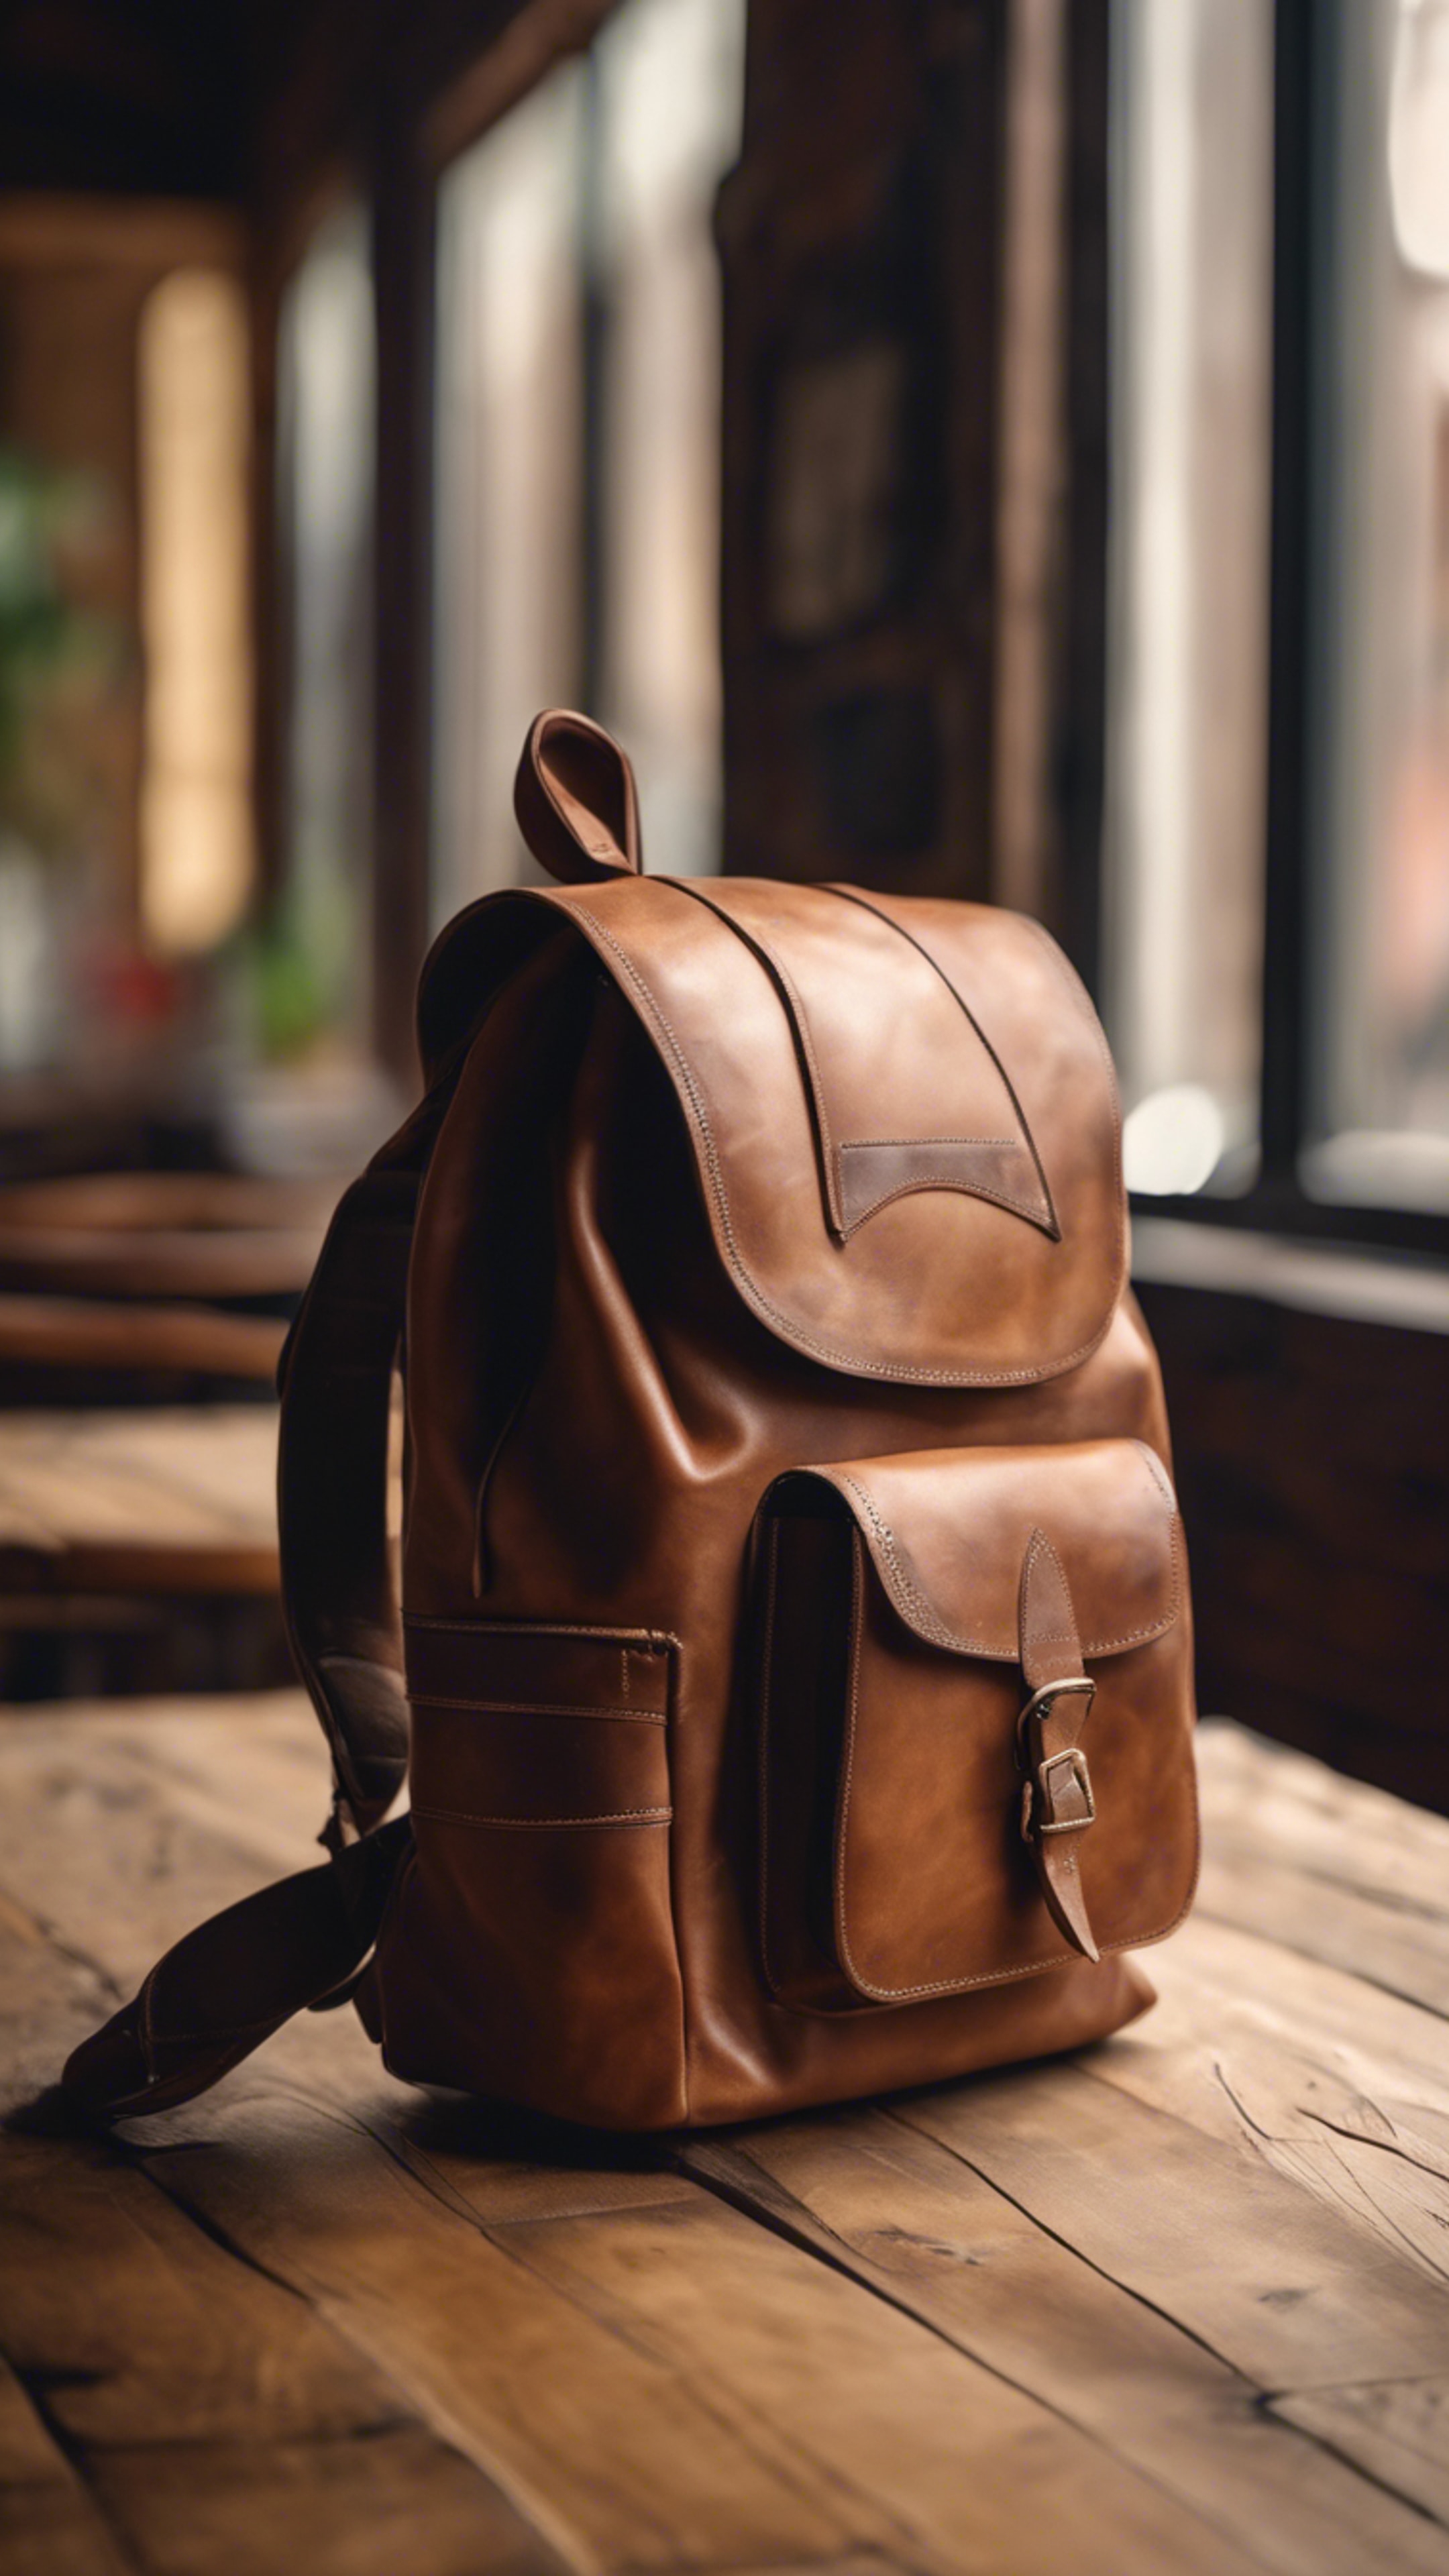 A vintage brown leather backpack sitting on a wooden table in a cozy café. Тапет[7ce12483b5e34217b072]